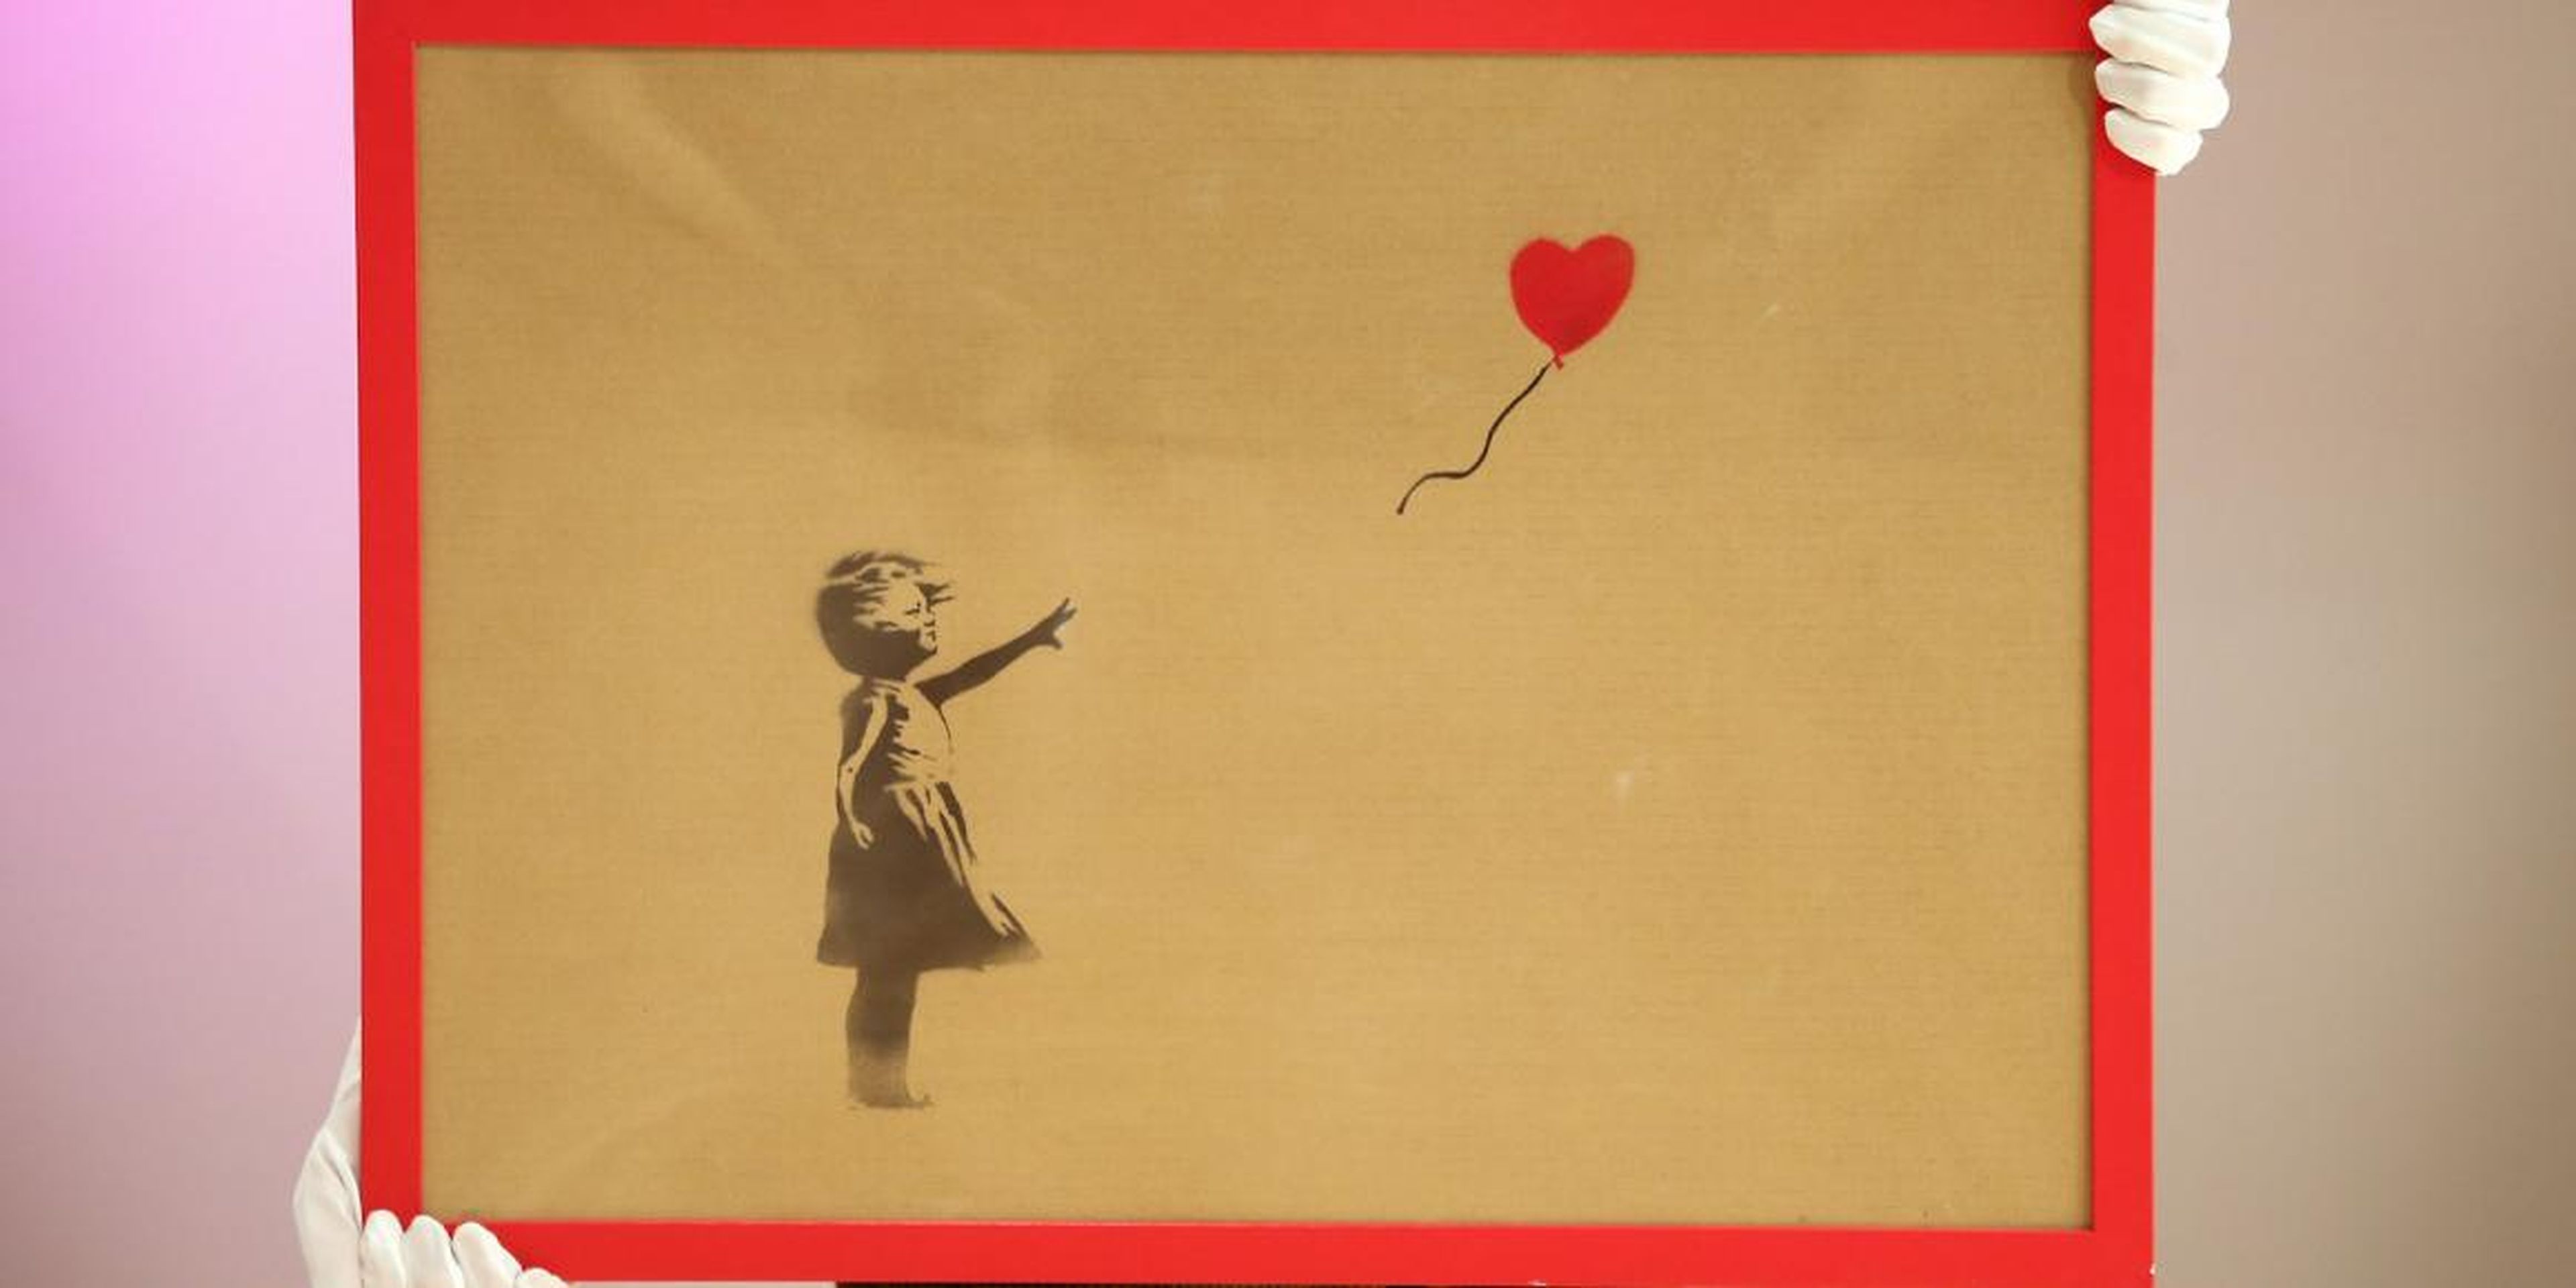 'Girl with Ballon' by Banksy